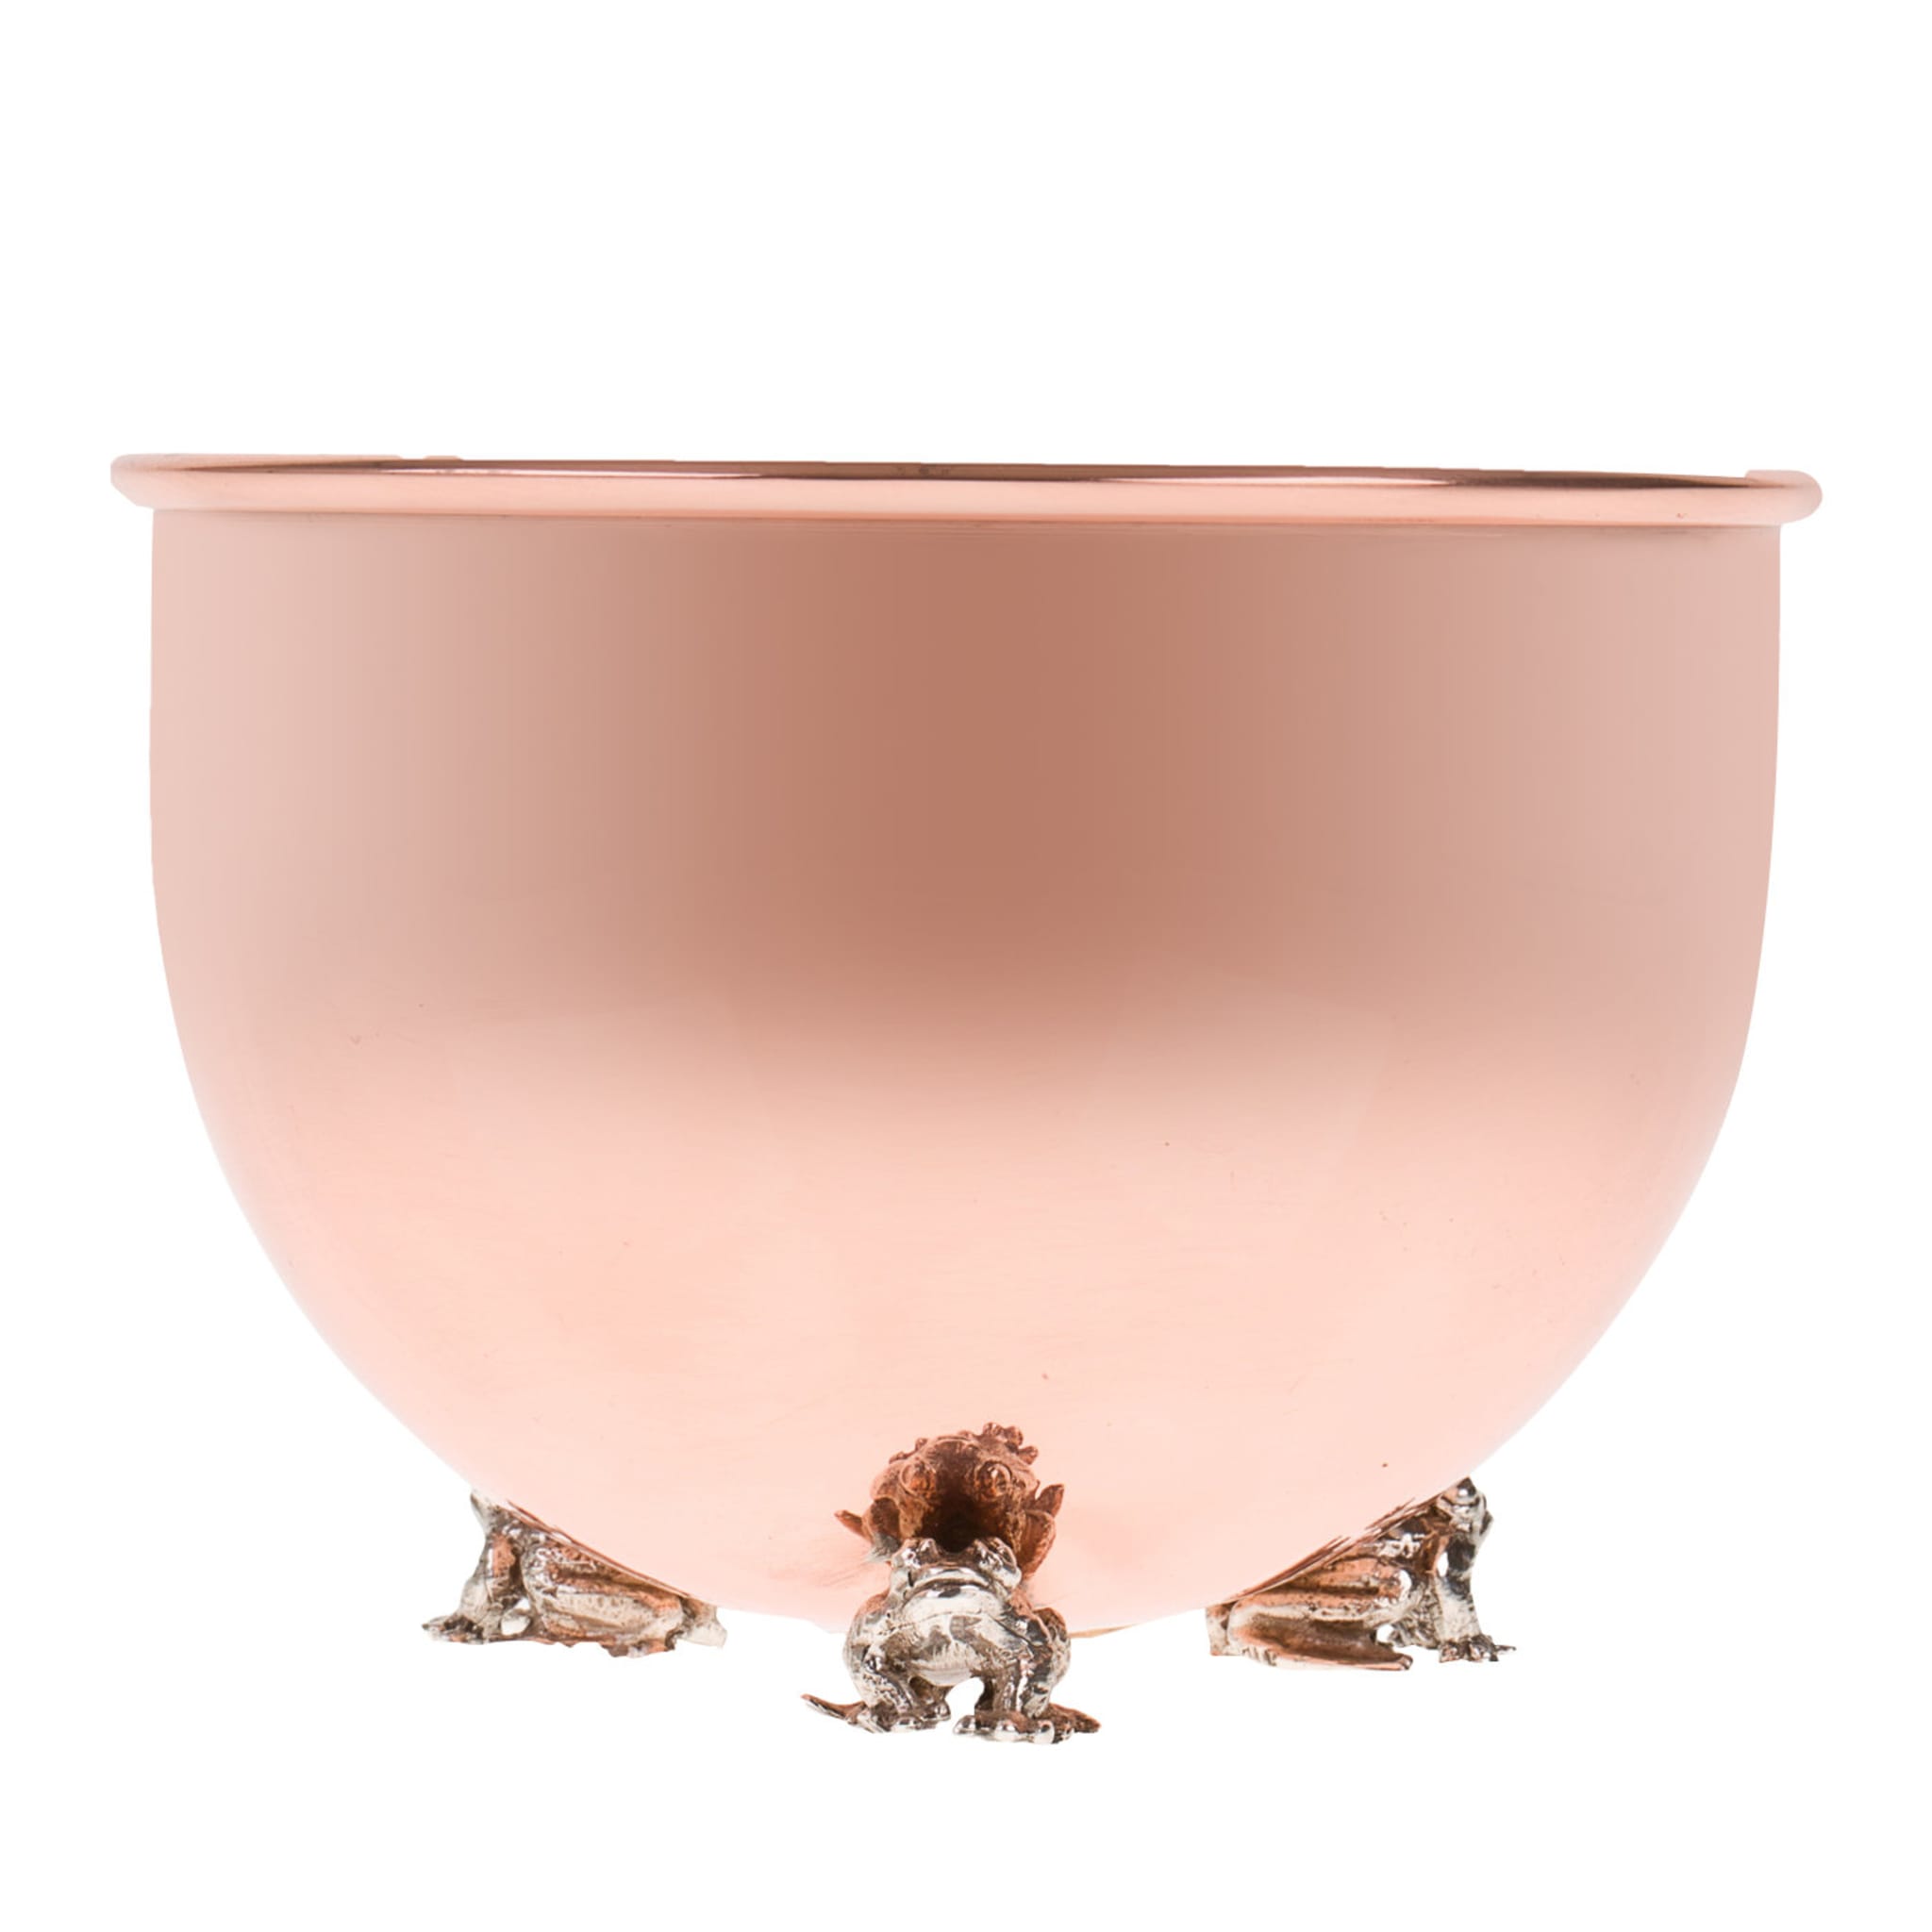 Copper Bowl with Silver Frogs - Alternative view 1